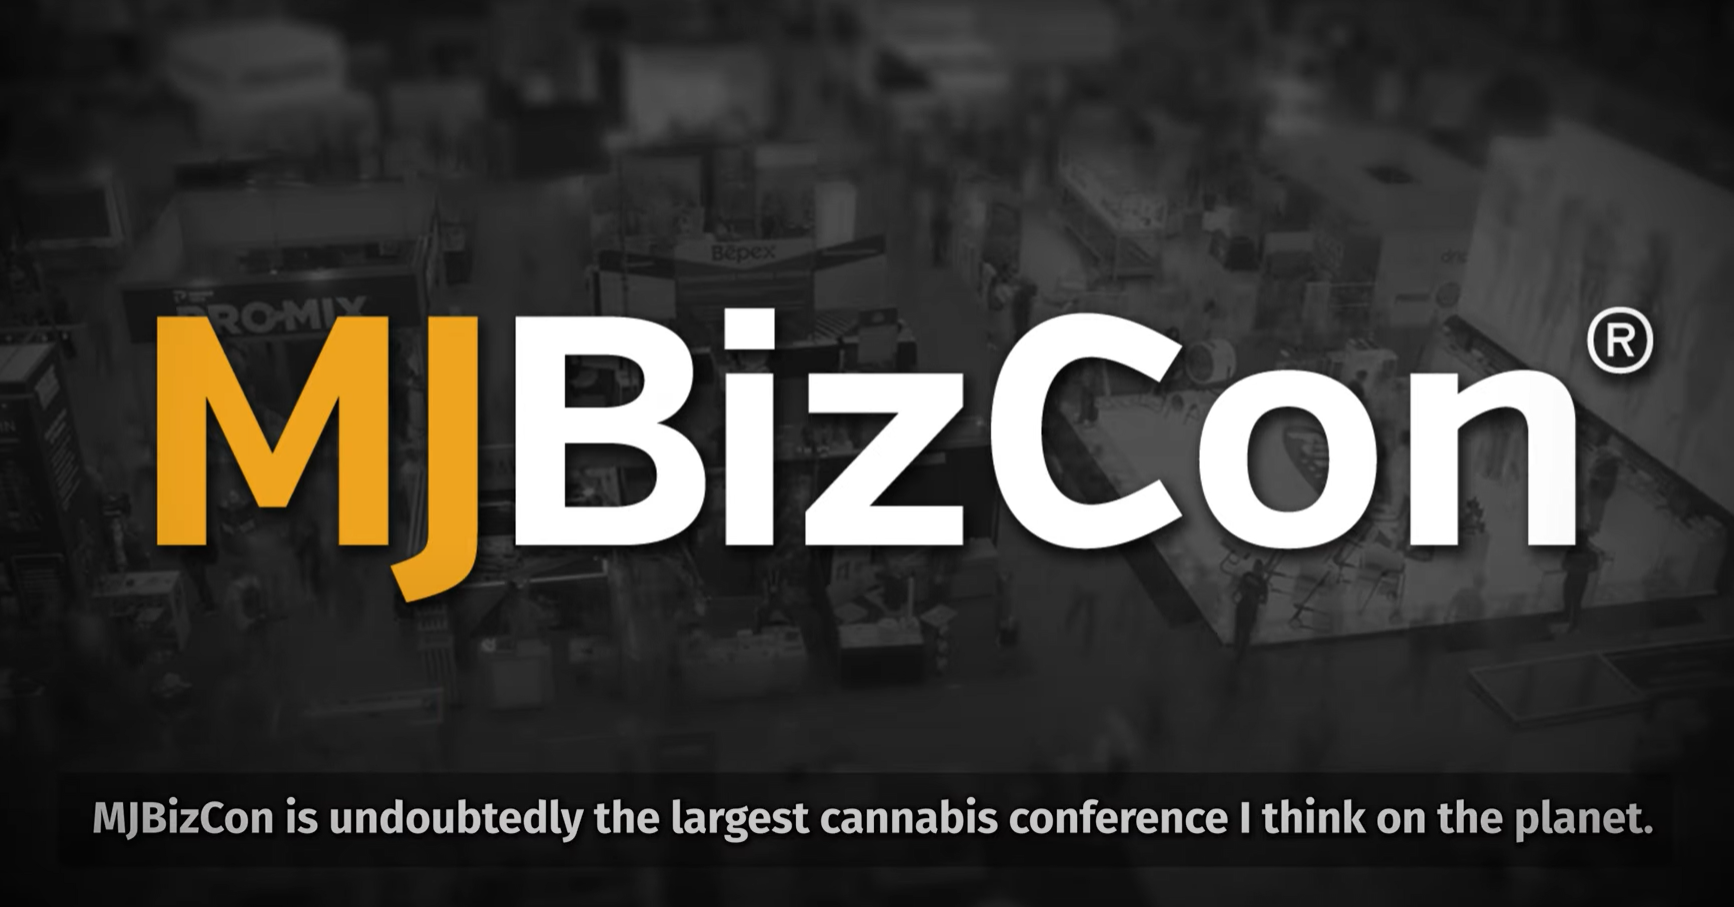 exhibition stand design and build at mjbizcon